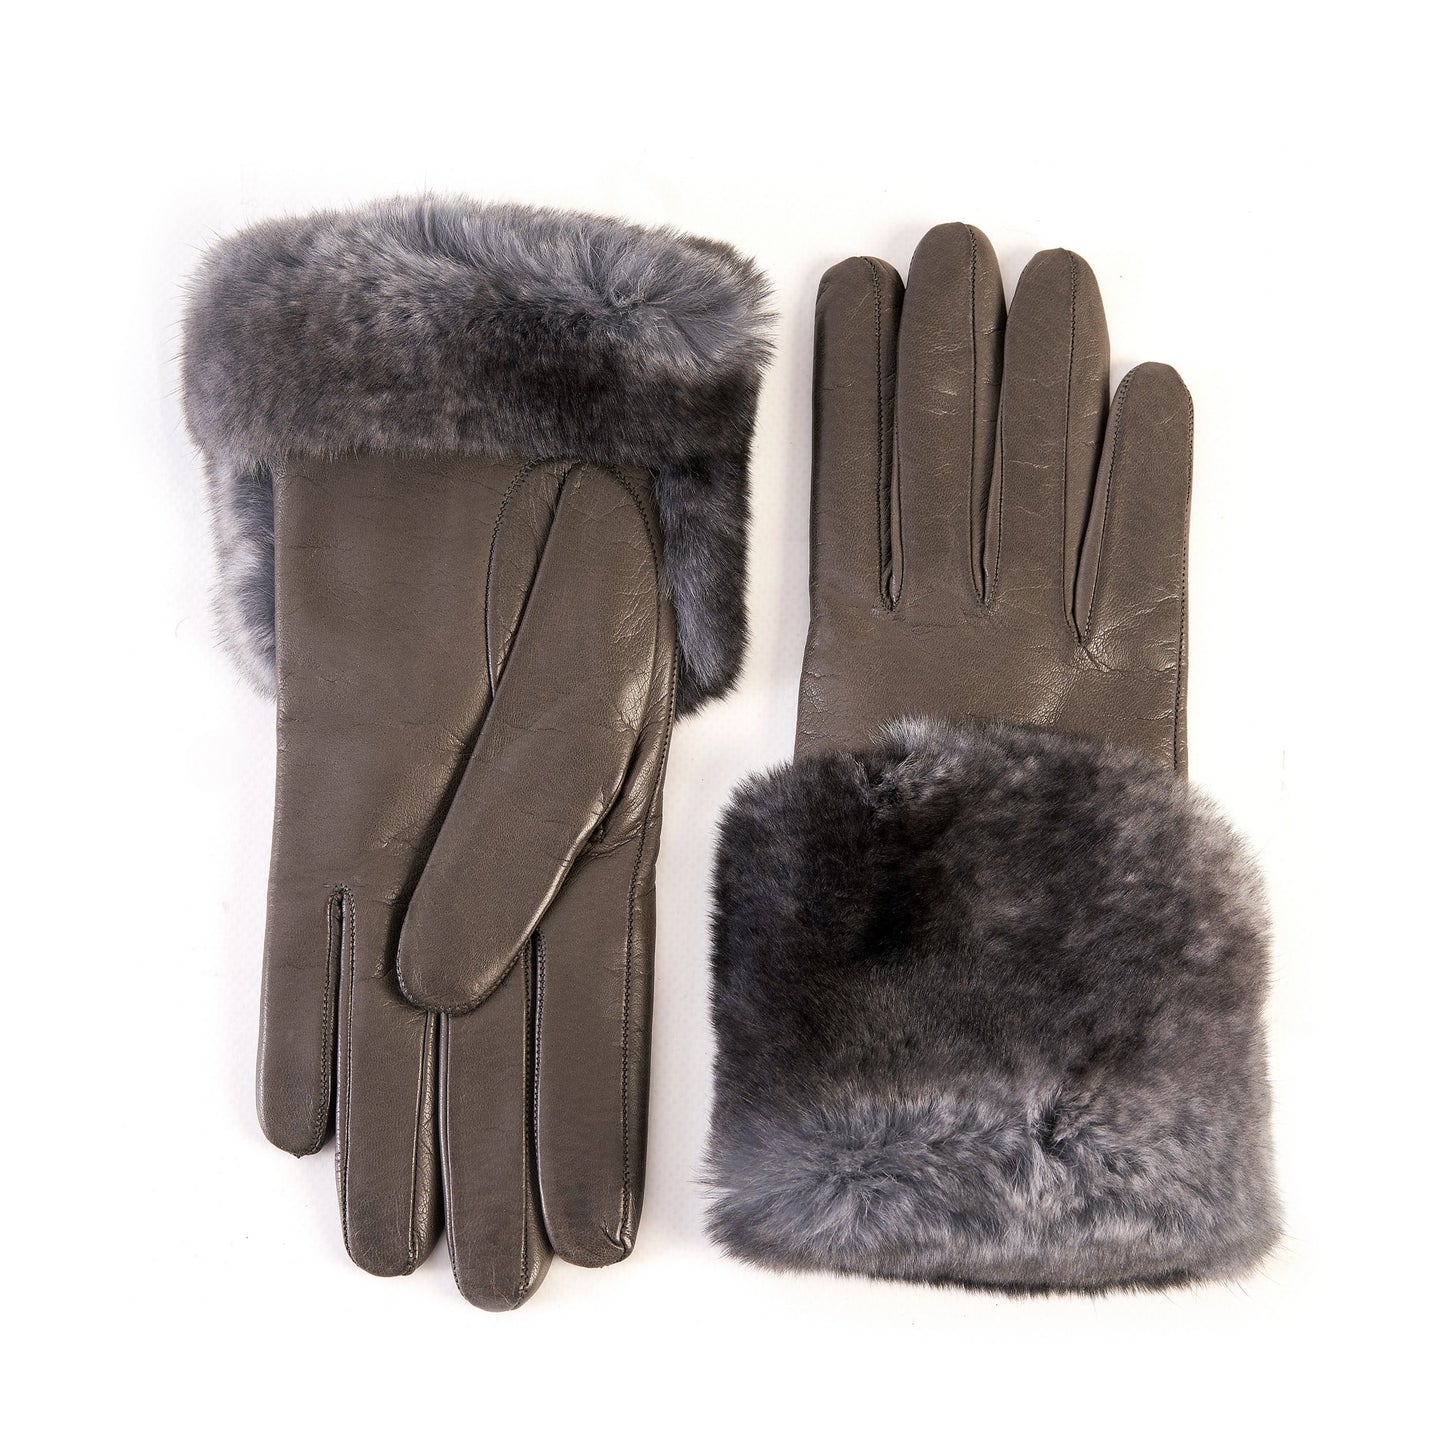 Women's mud nappa leather gloves with a wide real fur panel on the top and cashmere lined